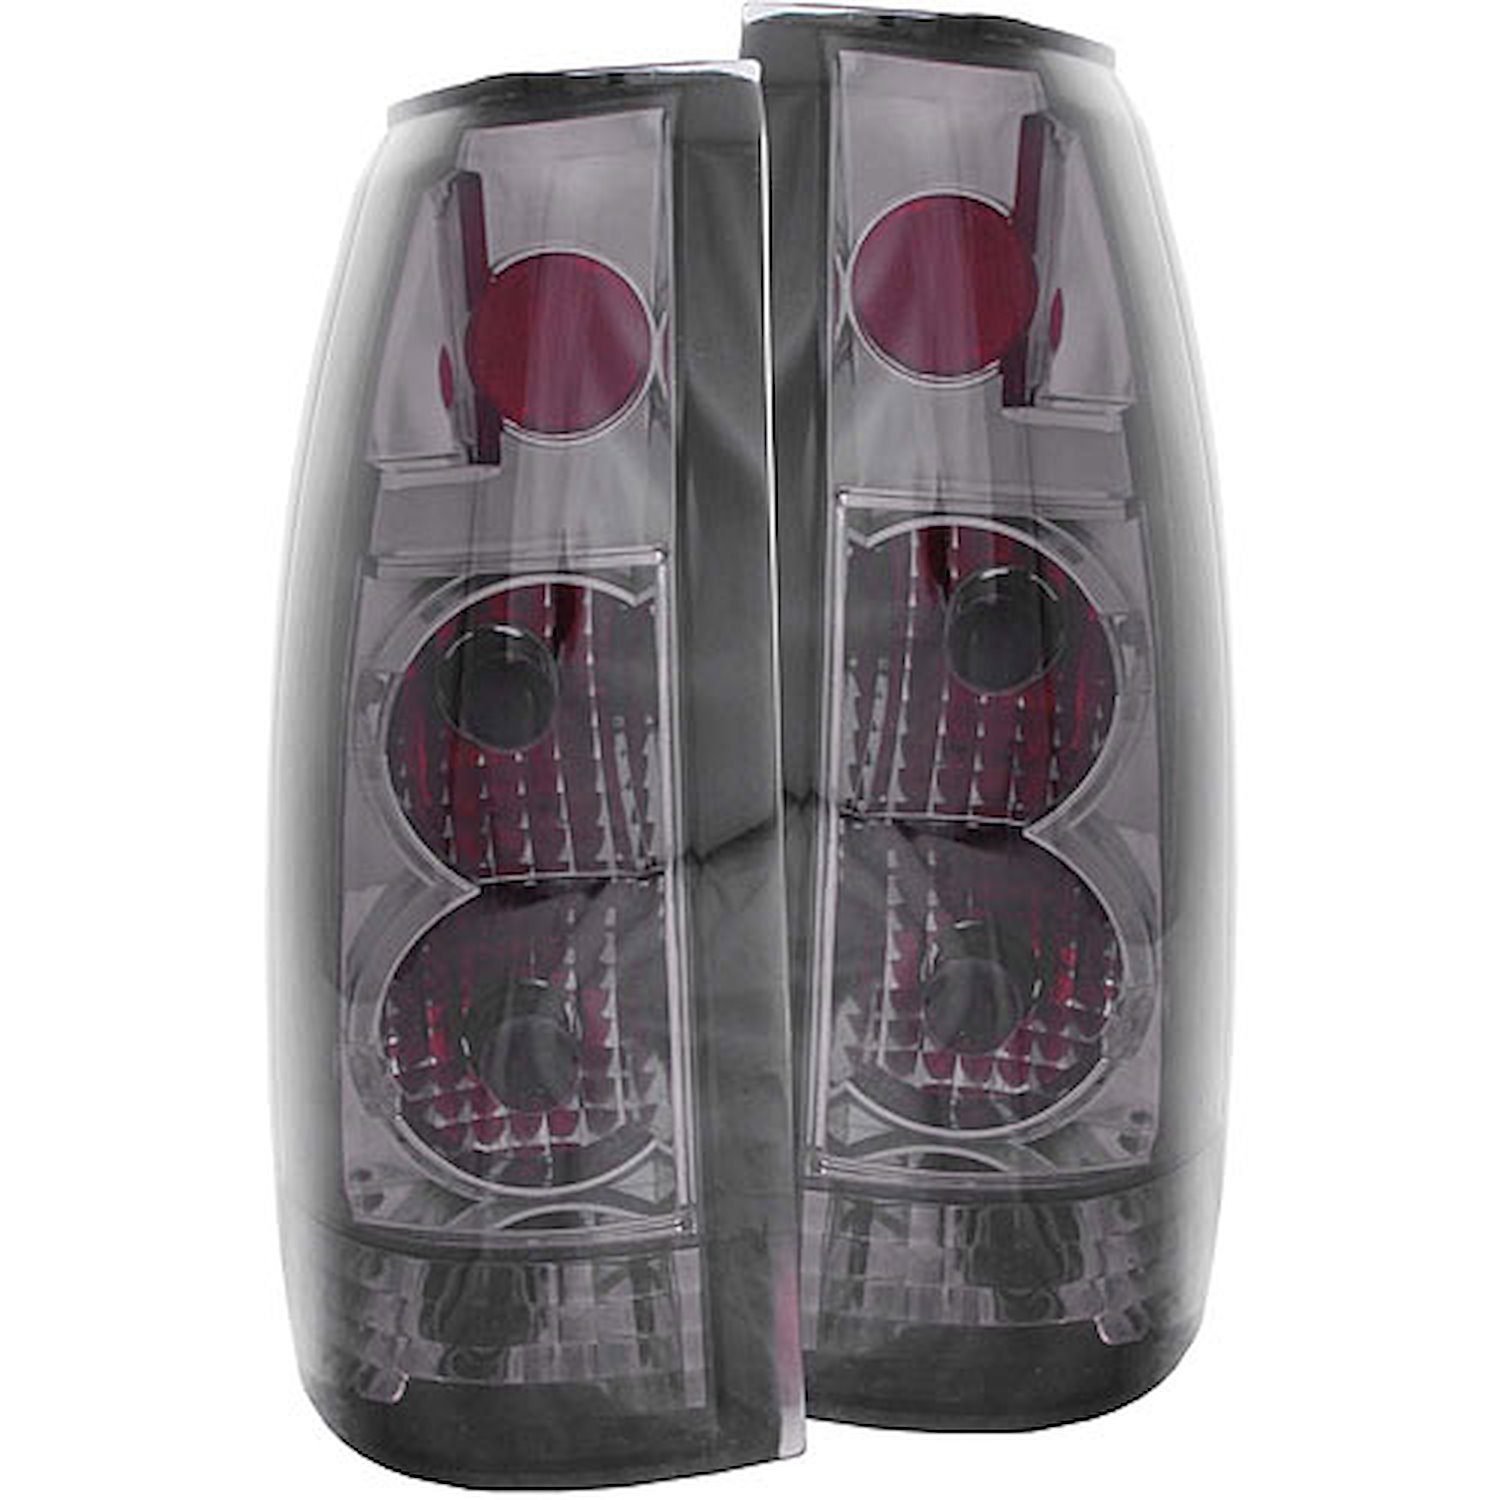 1988-1998 Chevy/GMC Full Size Truck/SUV Taillights